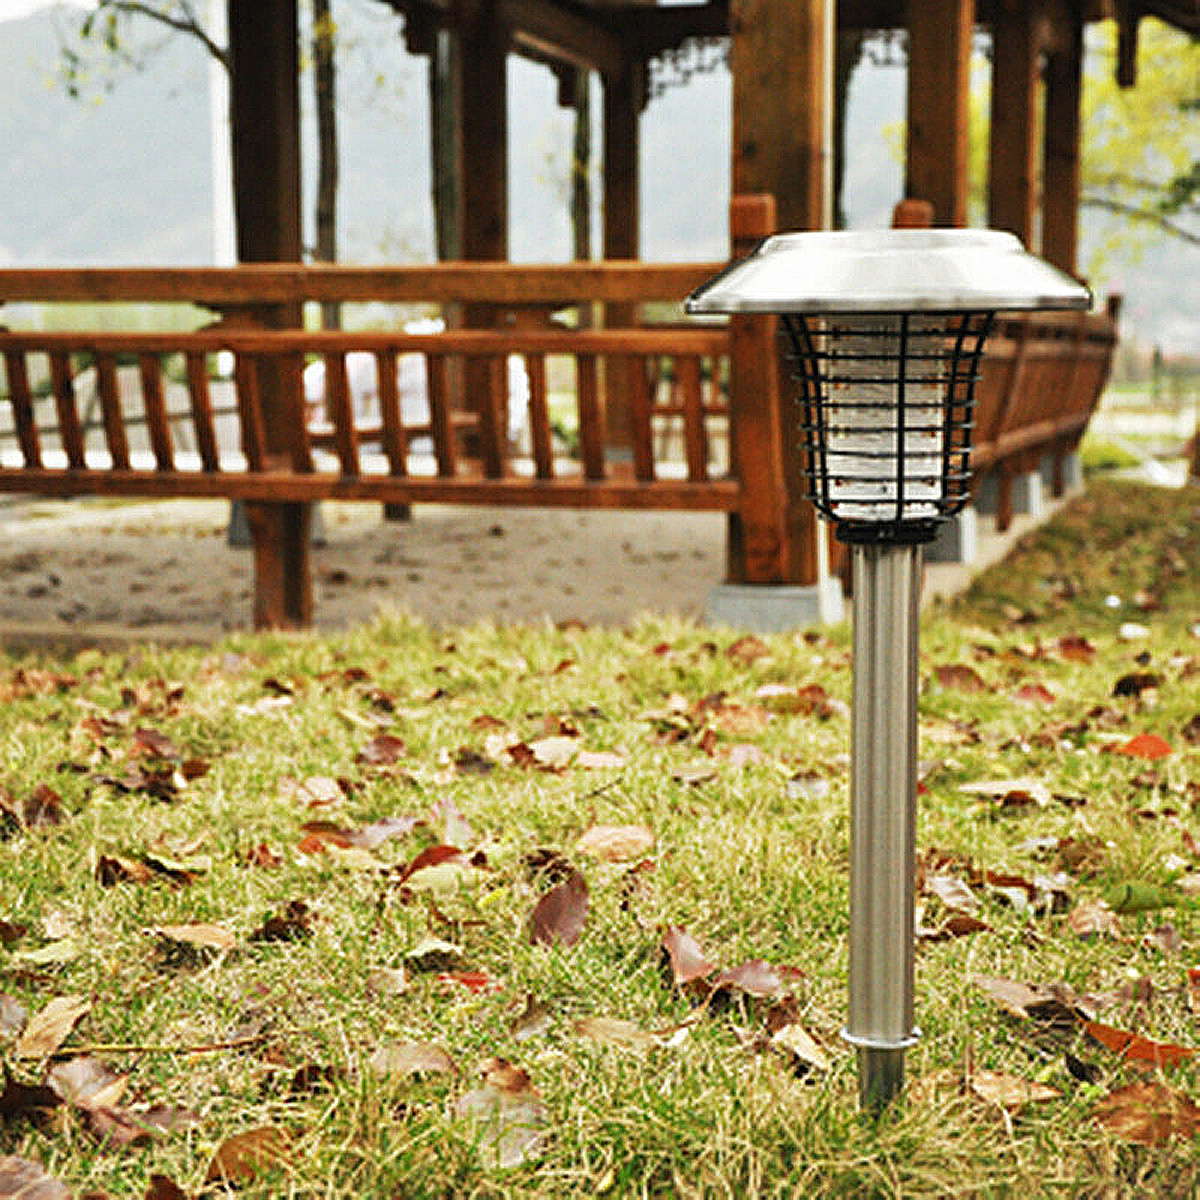 Solar-Electric-Shock-Mosquito-LED-Light-Fly-Bug-Insect-Zapper-Killer-Trap-Lamp-Intelligent-Light-con-1490338-2